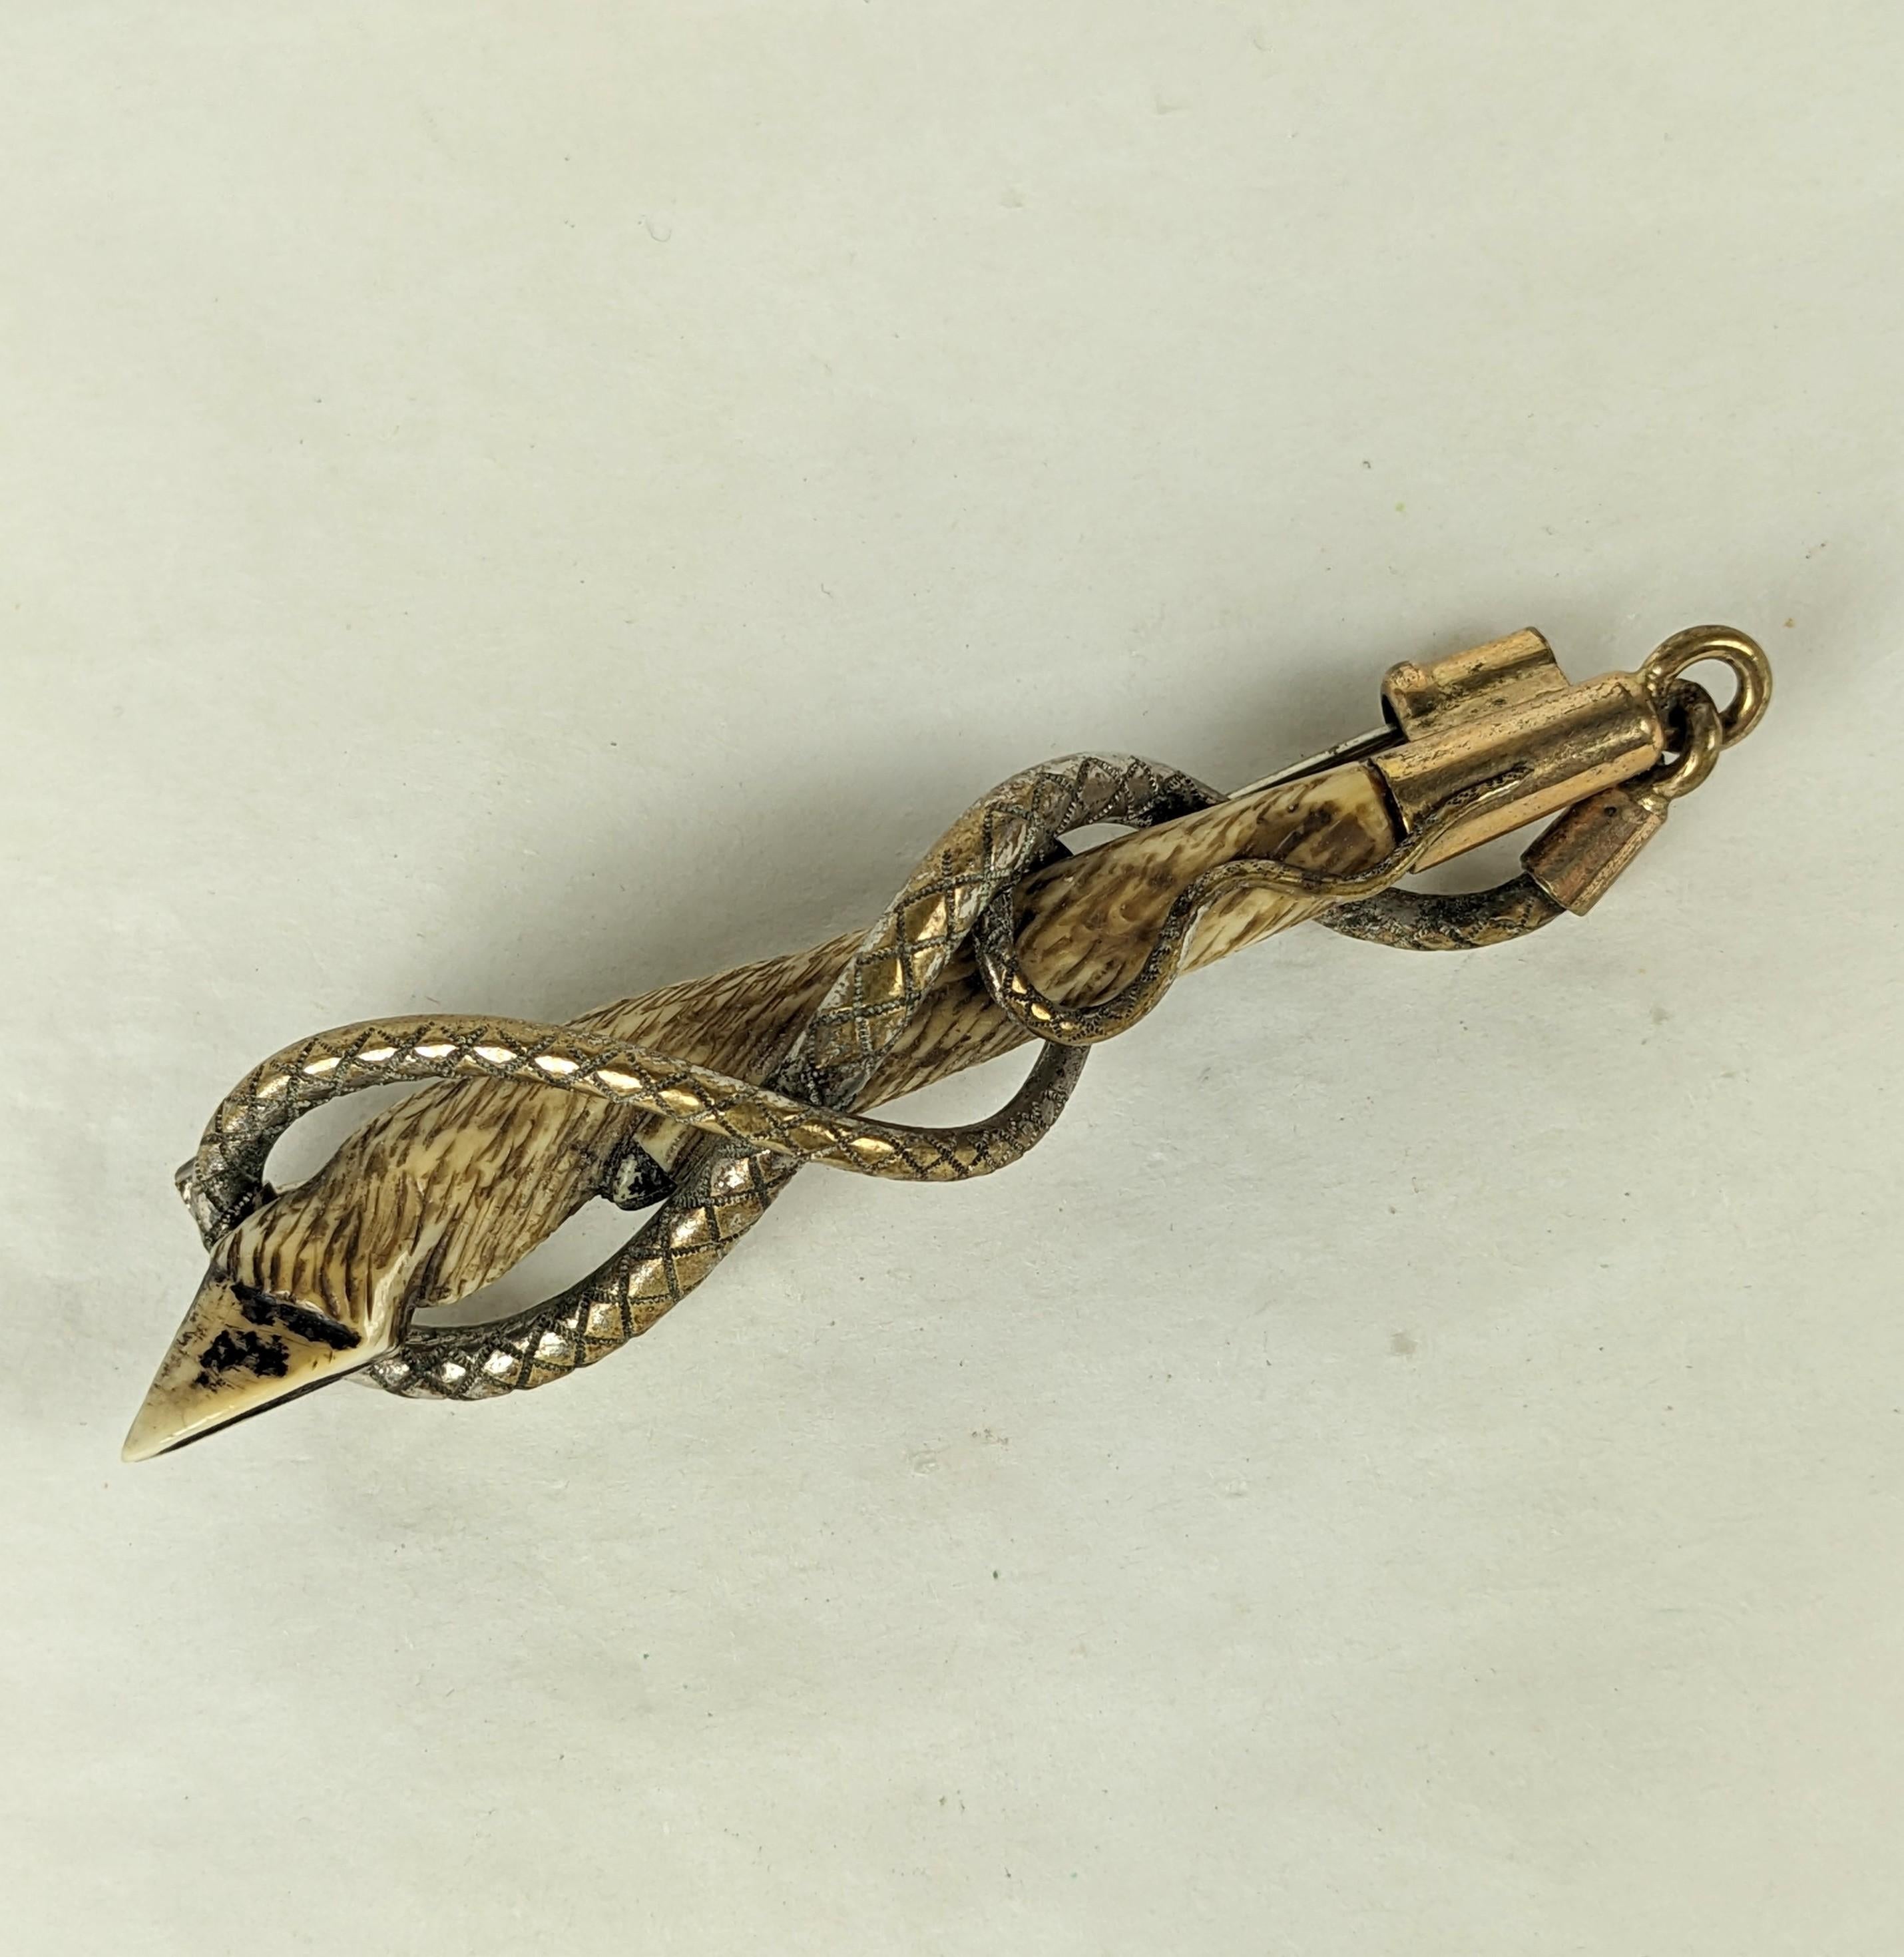 Unusual and Elegant Victorian Carved Bone Riding or Hunting Brooch from the 19th Century. A hand carved hoof is entwined by a textured snake like crop motif with gilt tips. 1870's. 3